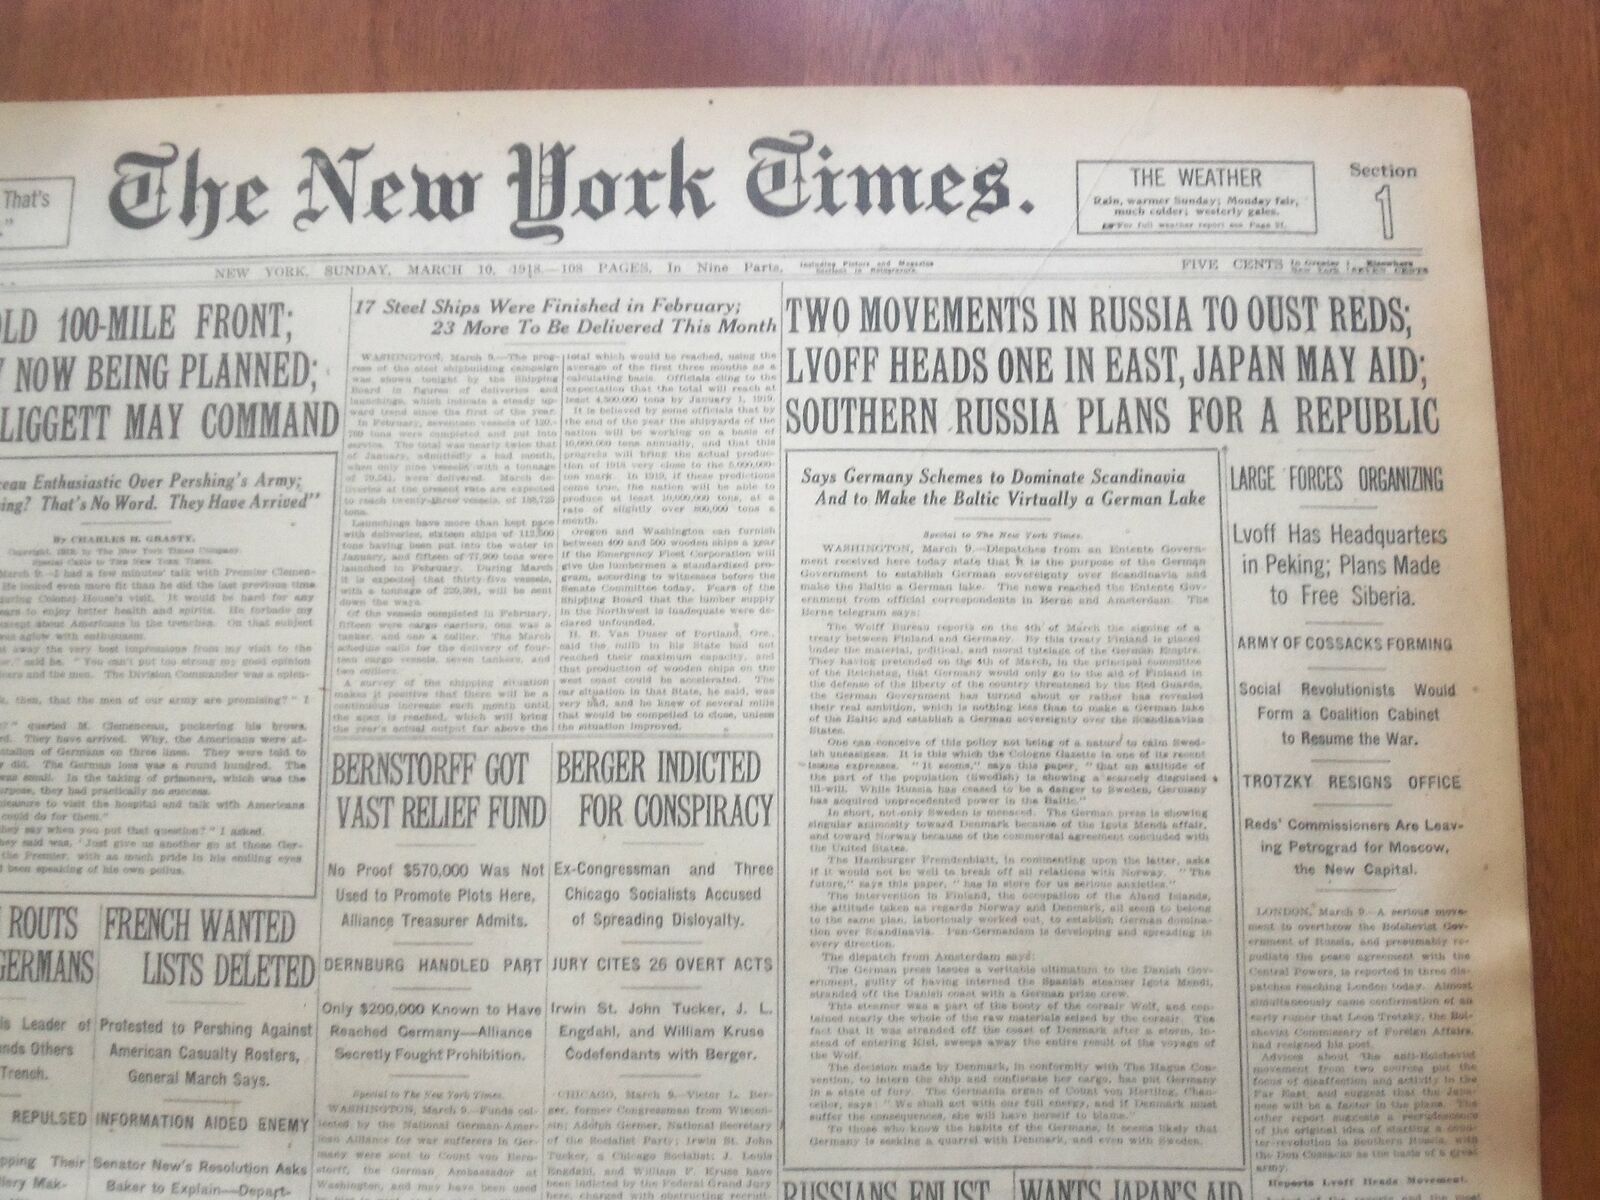 1918 MARCH 10 NEW YORK TIMES - TWO MOVEMENTS IN RUSSIA TO OUST REDS - NT 8147